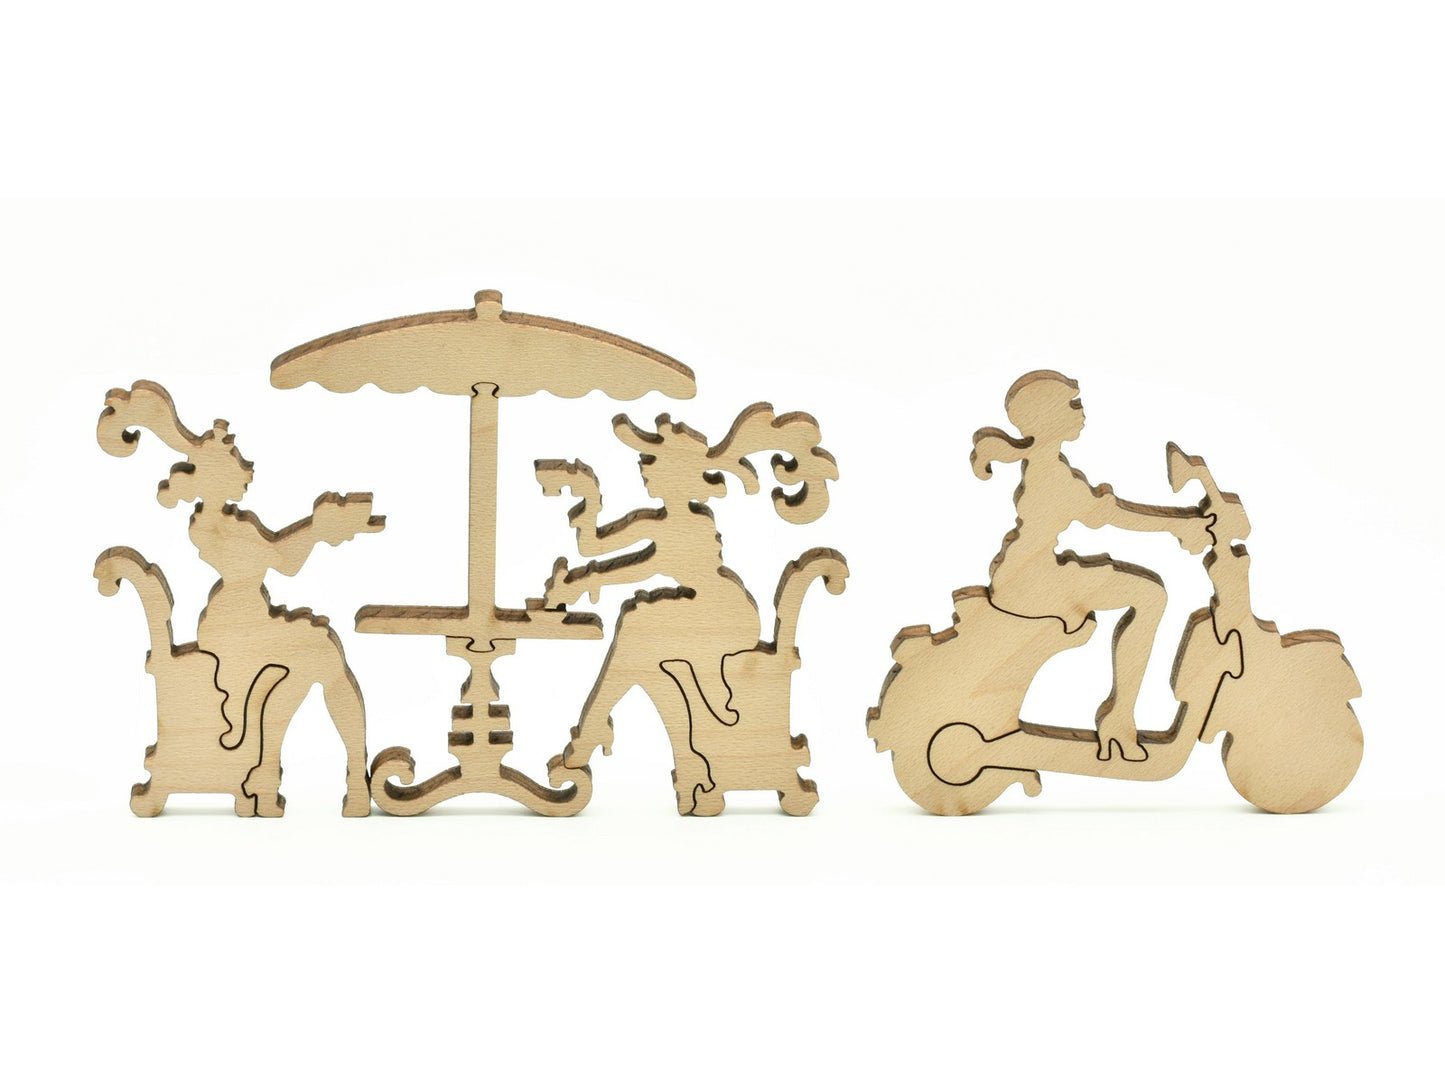 A closeup of pieces in the shape of people at a cafe and a woman riding a scooter.